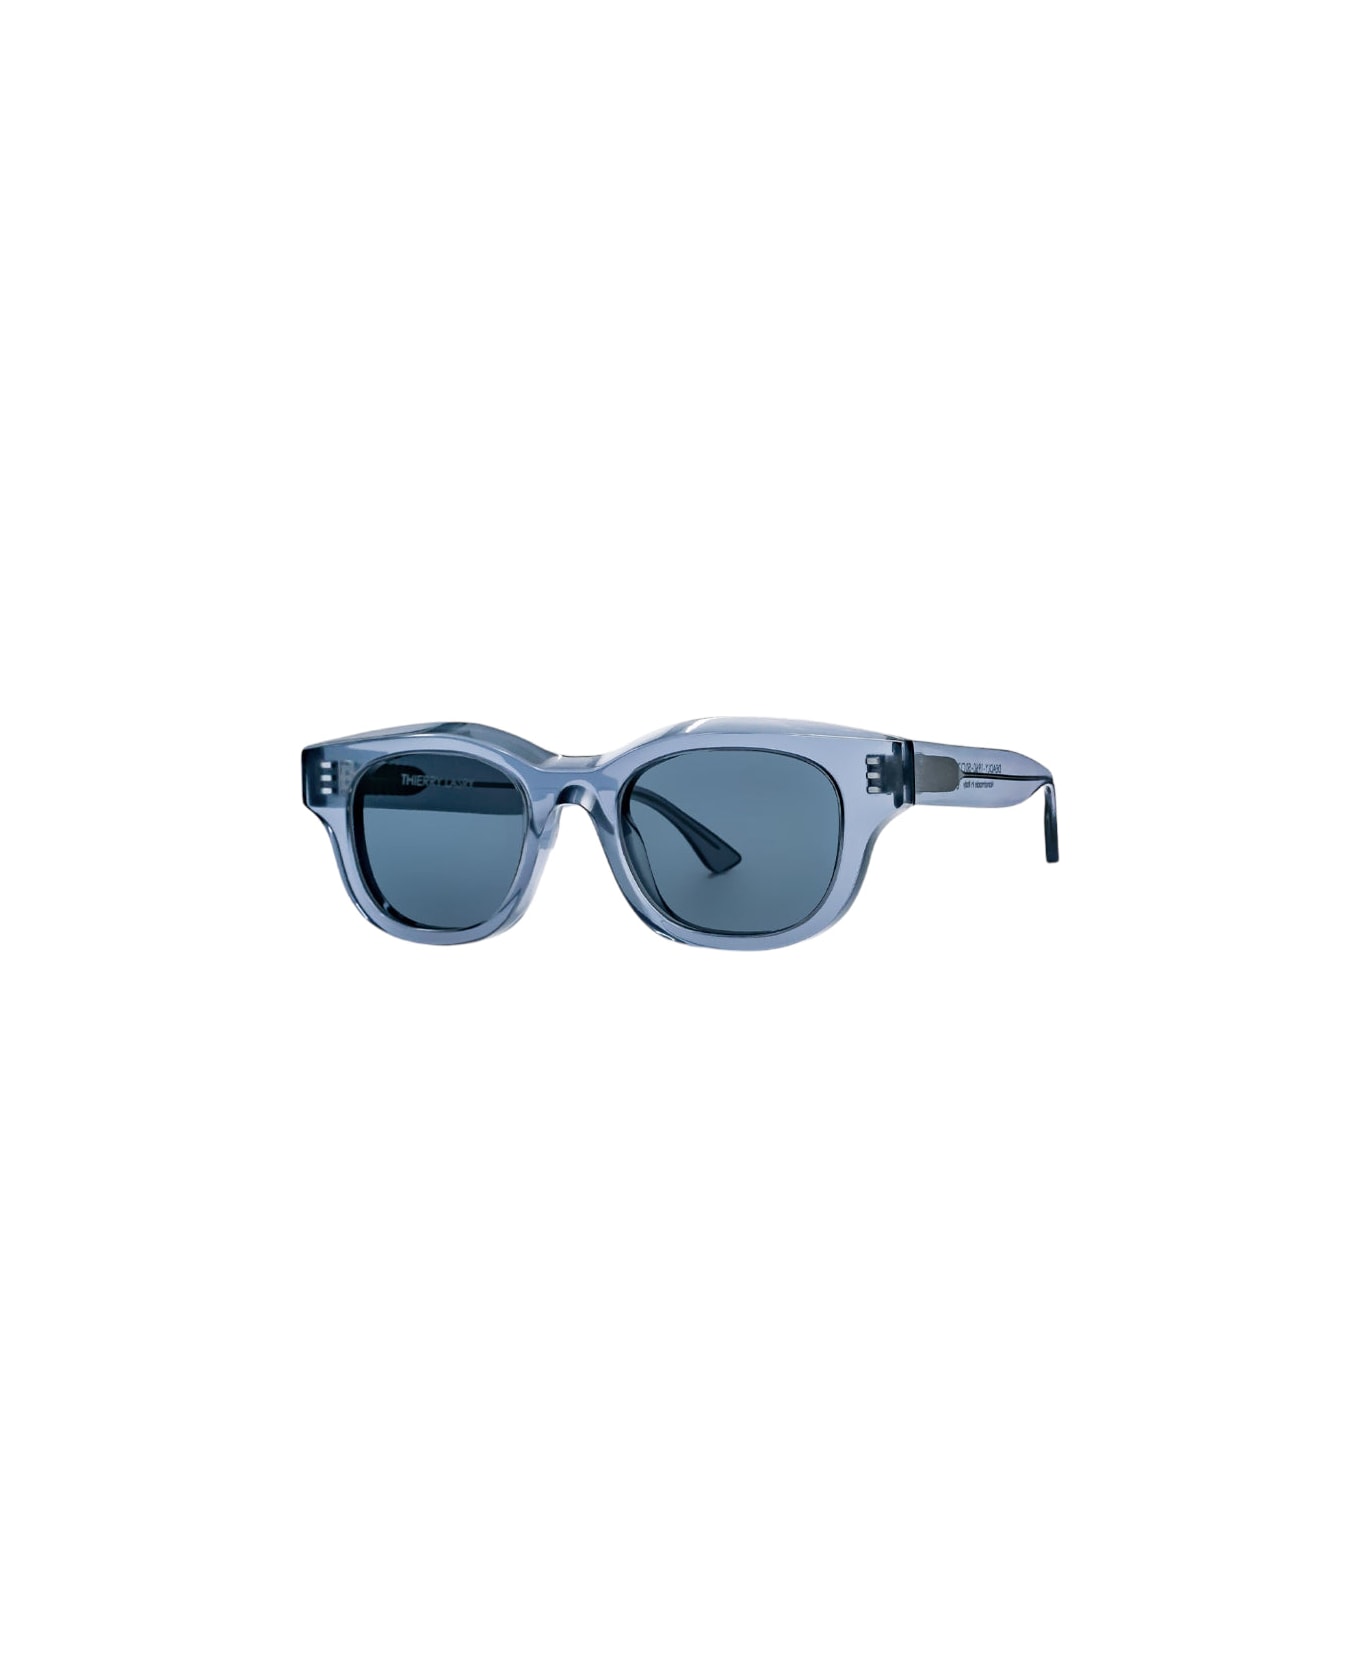 Thierry Lasry Deadly - Crystal Grey Sunglasses サングラス